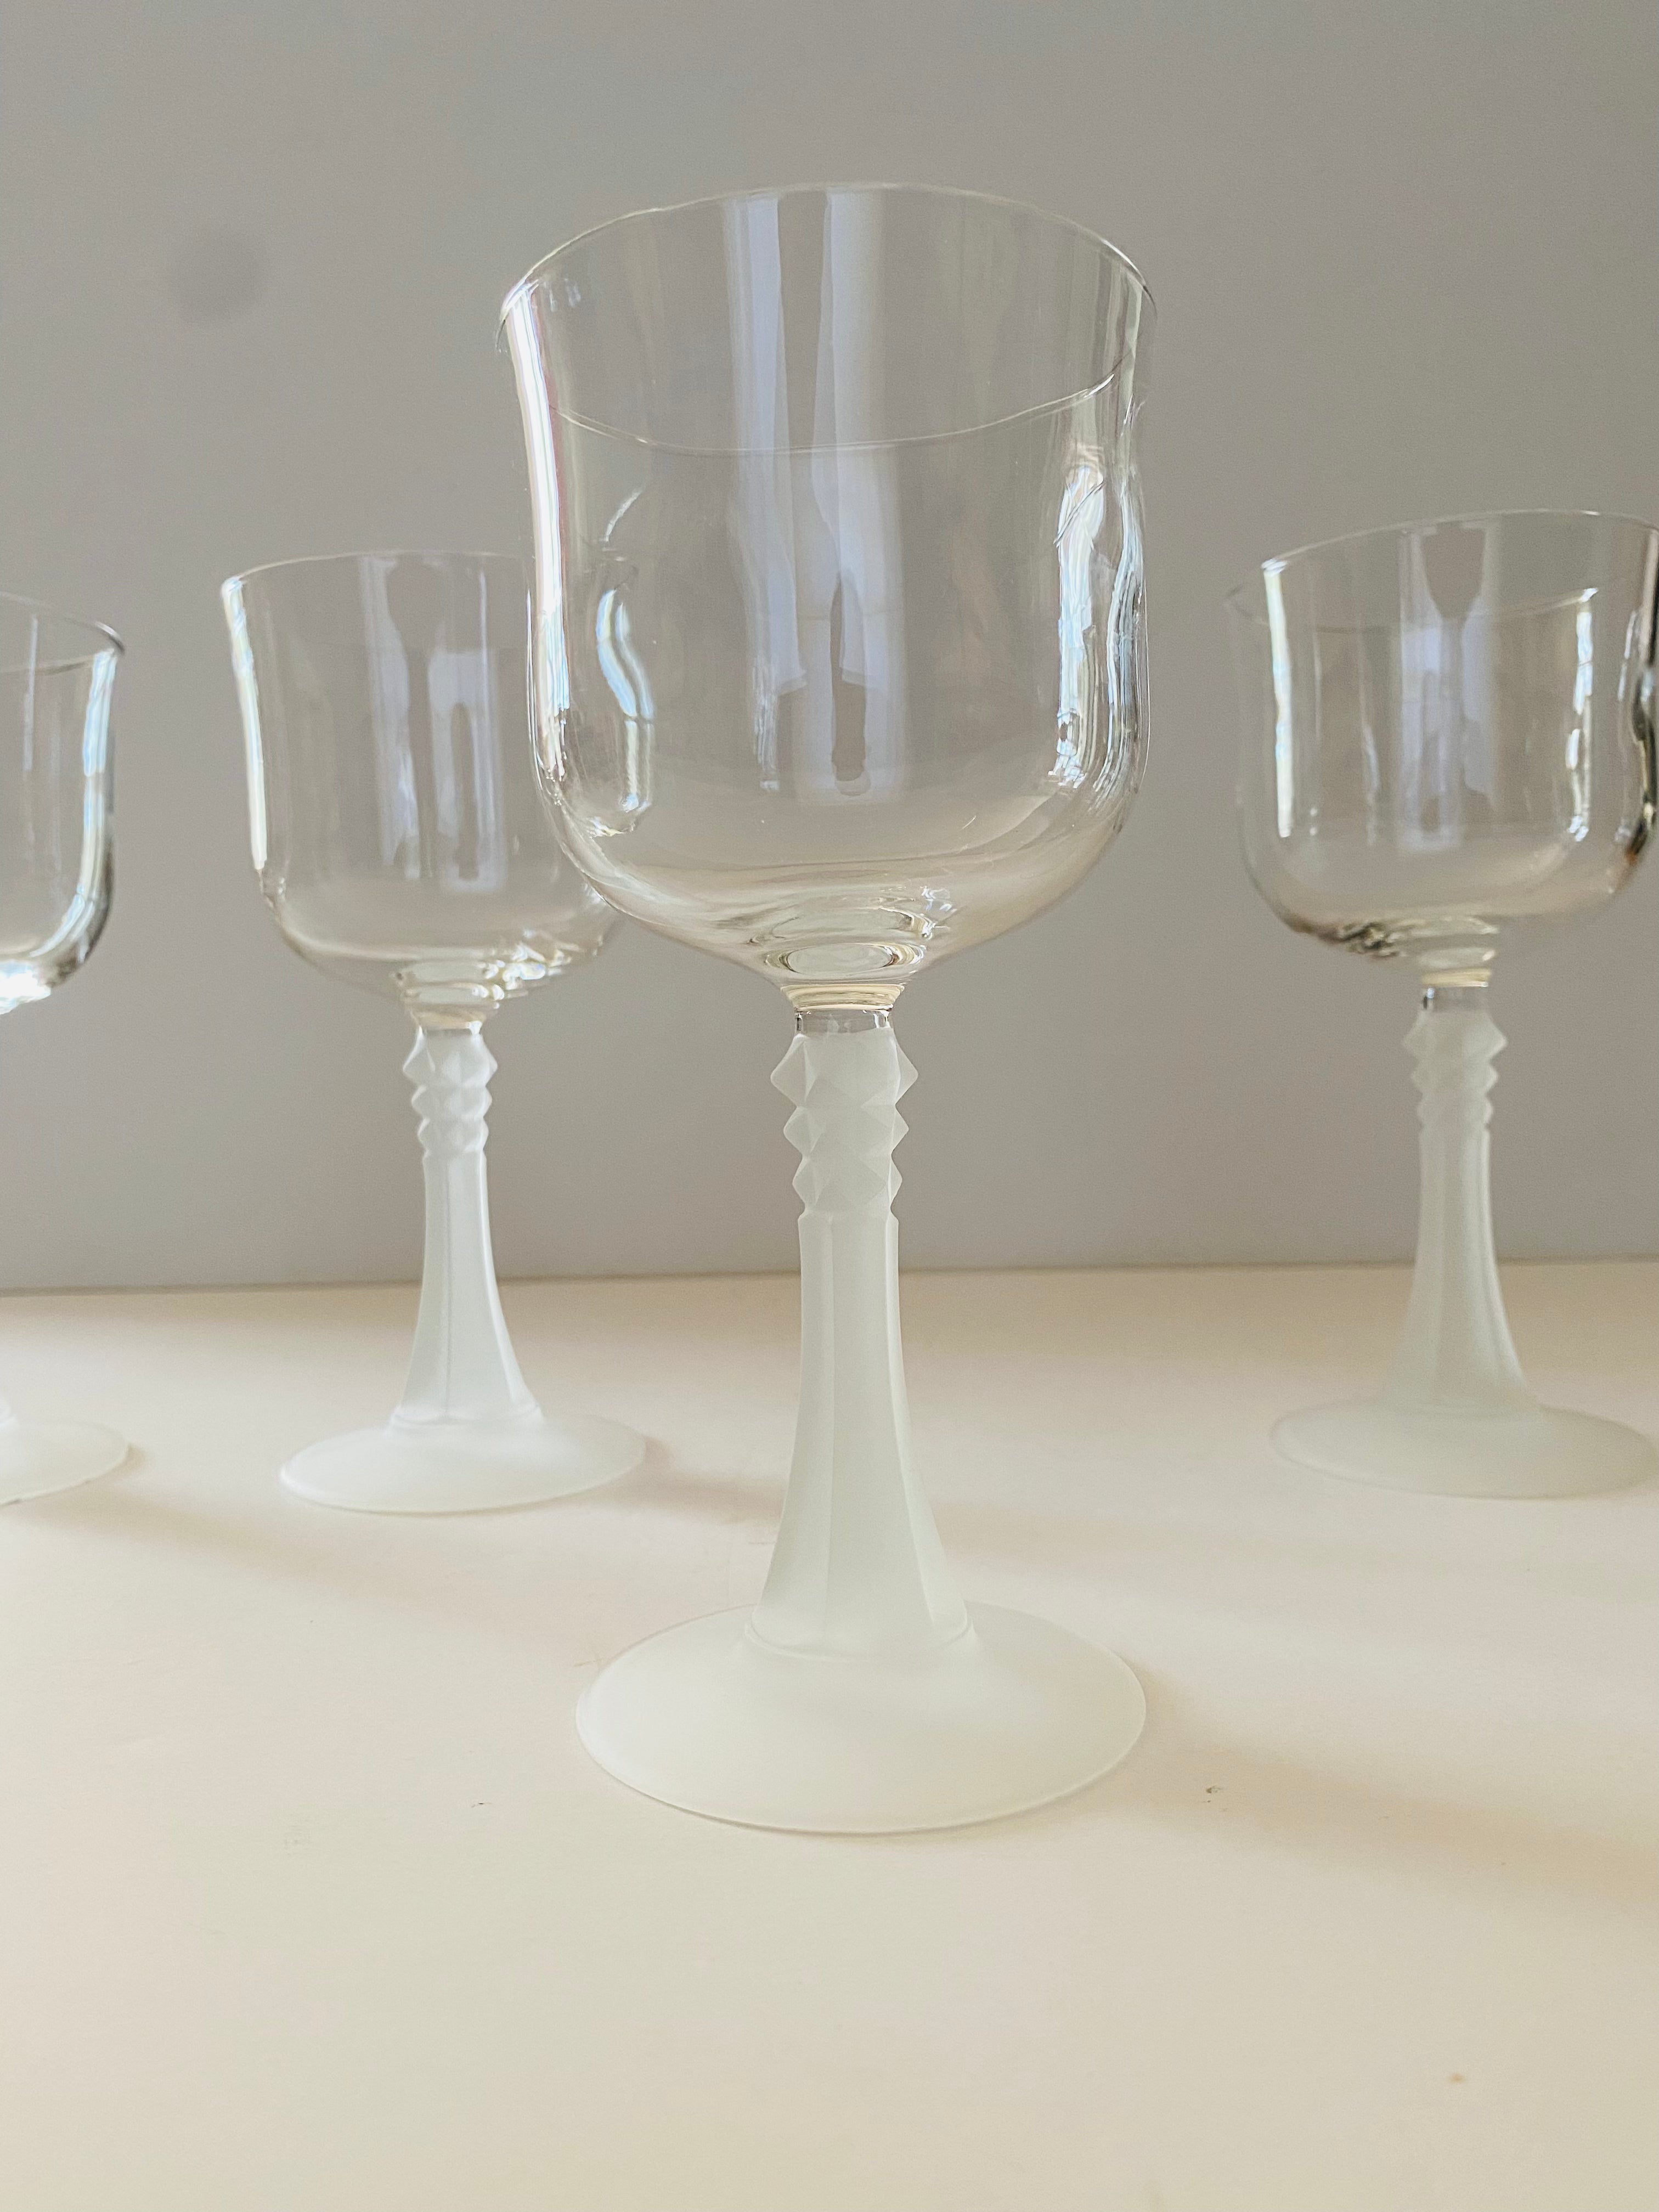 Cristal D'Arques Durand CRA37 Wine/Water Goblet With Frosted Stem Detail - Set of 4